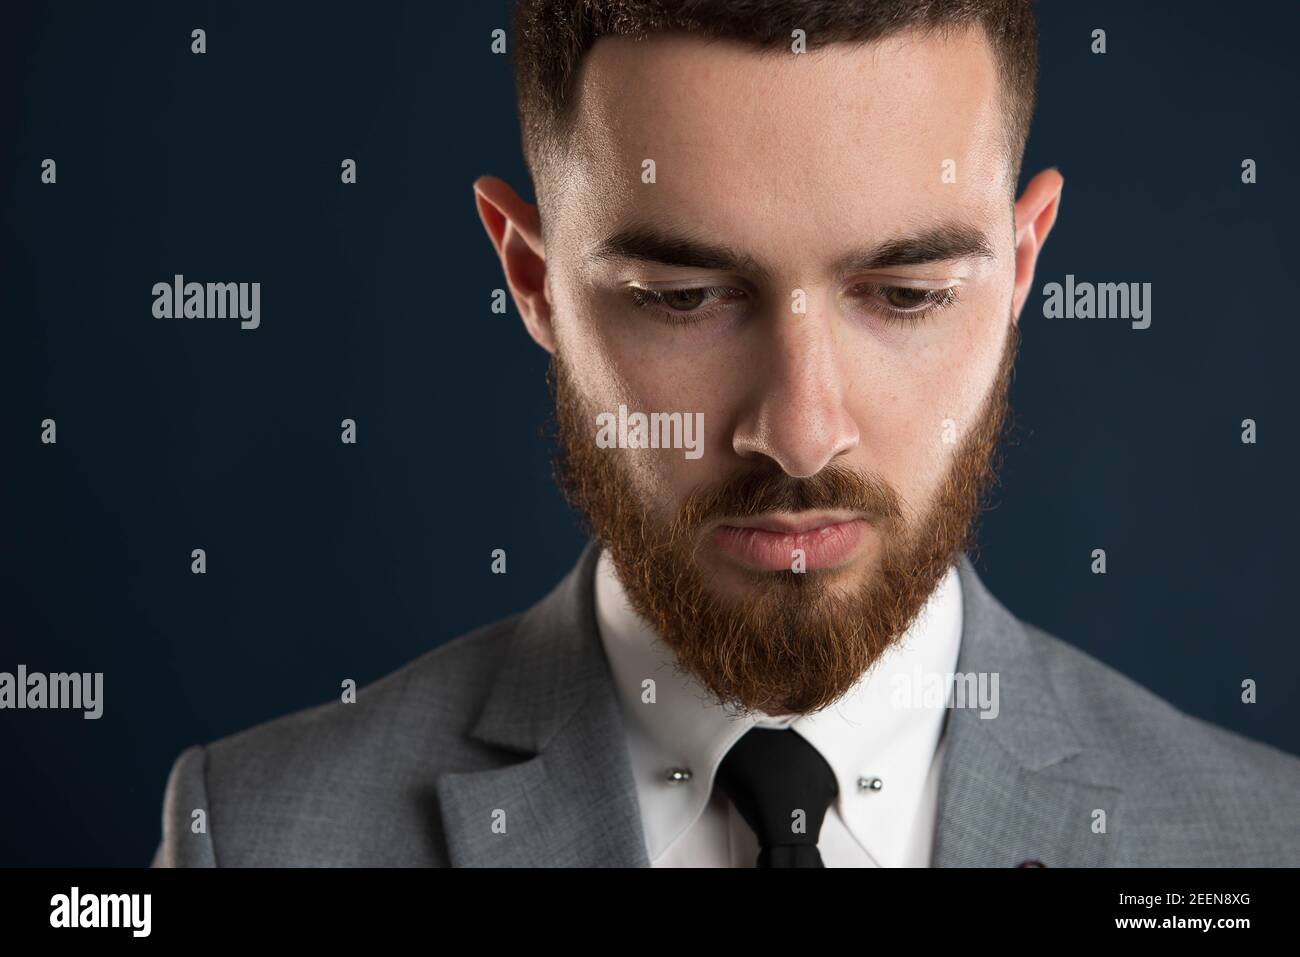 Closeup of the face of a young attractive entrepreneur wearing a grey suit and full beard Stock Photo